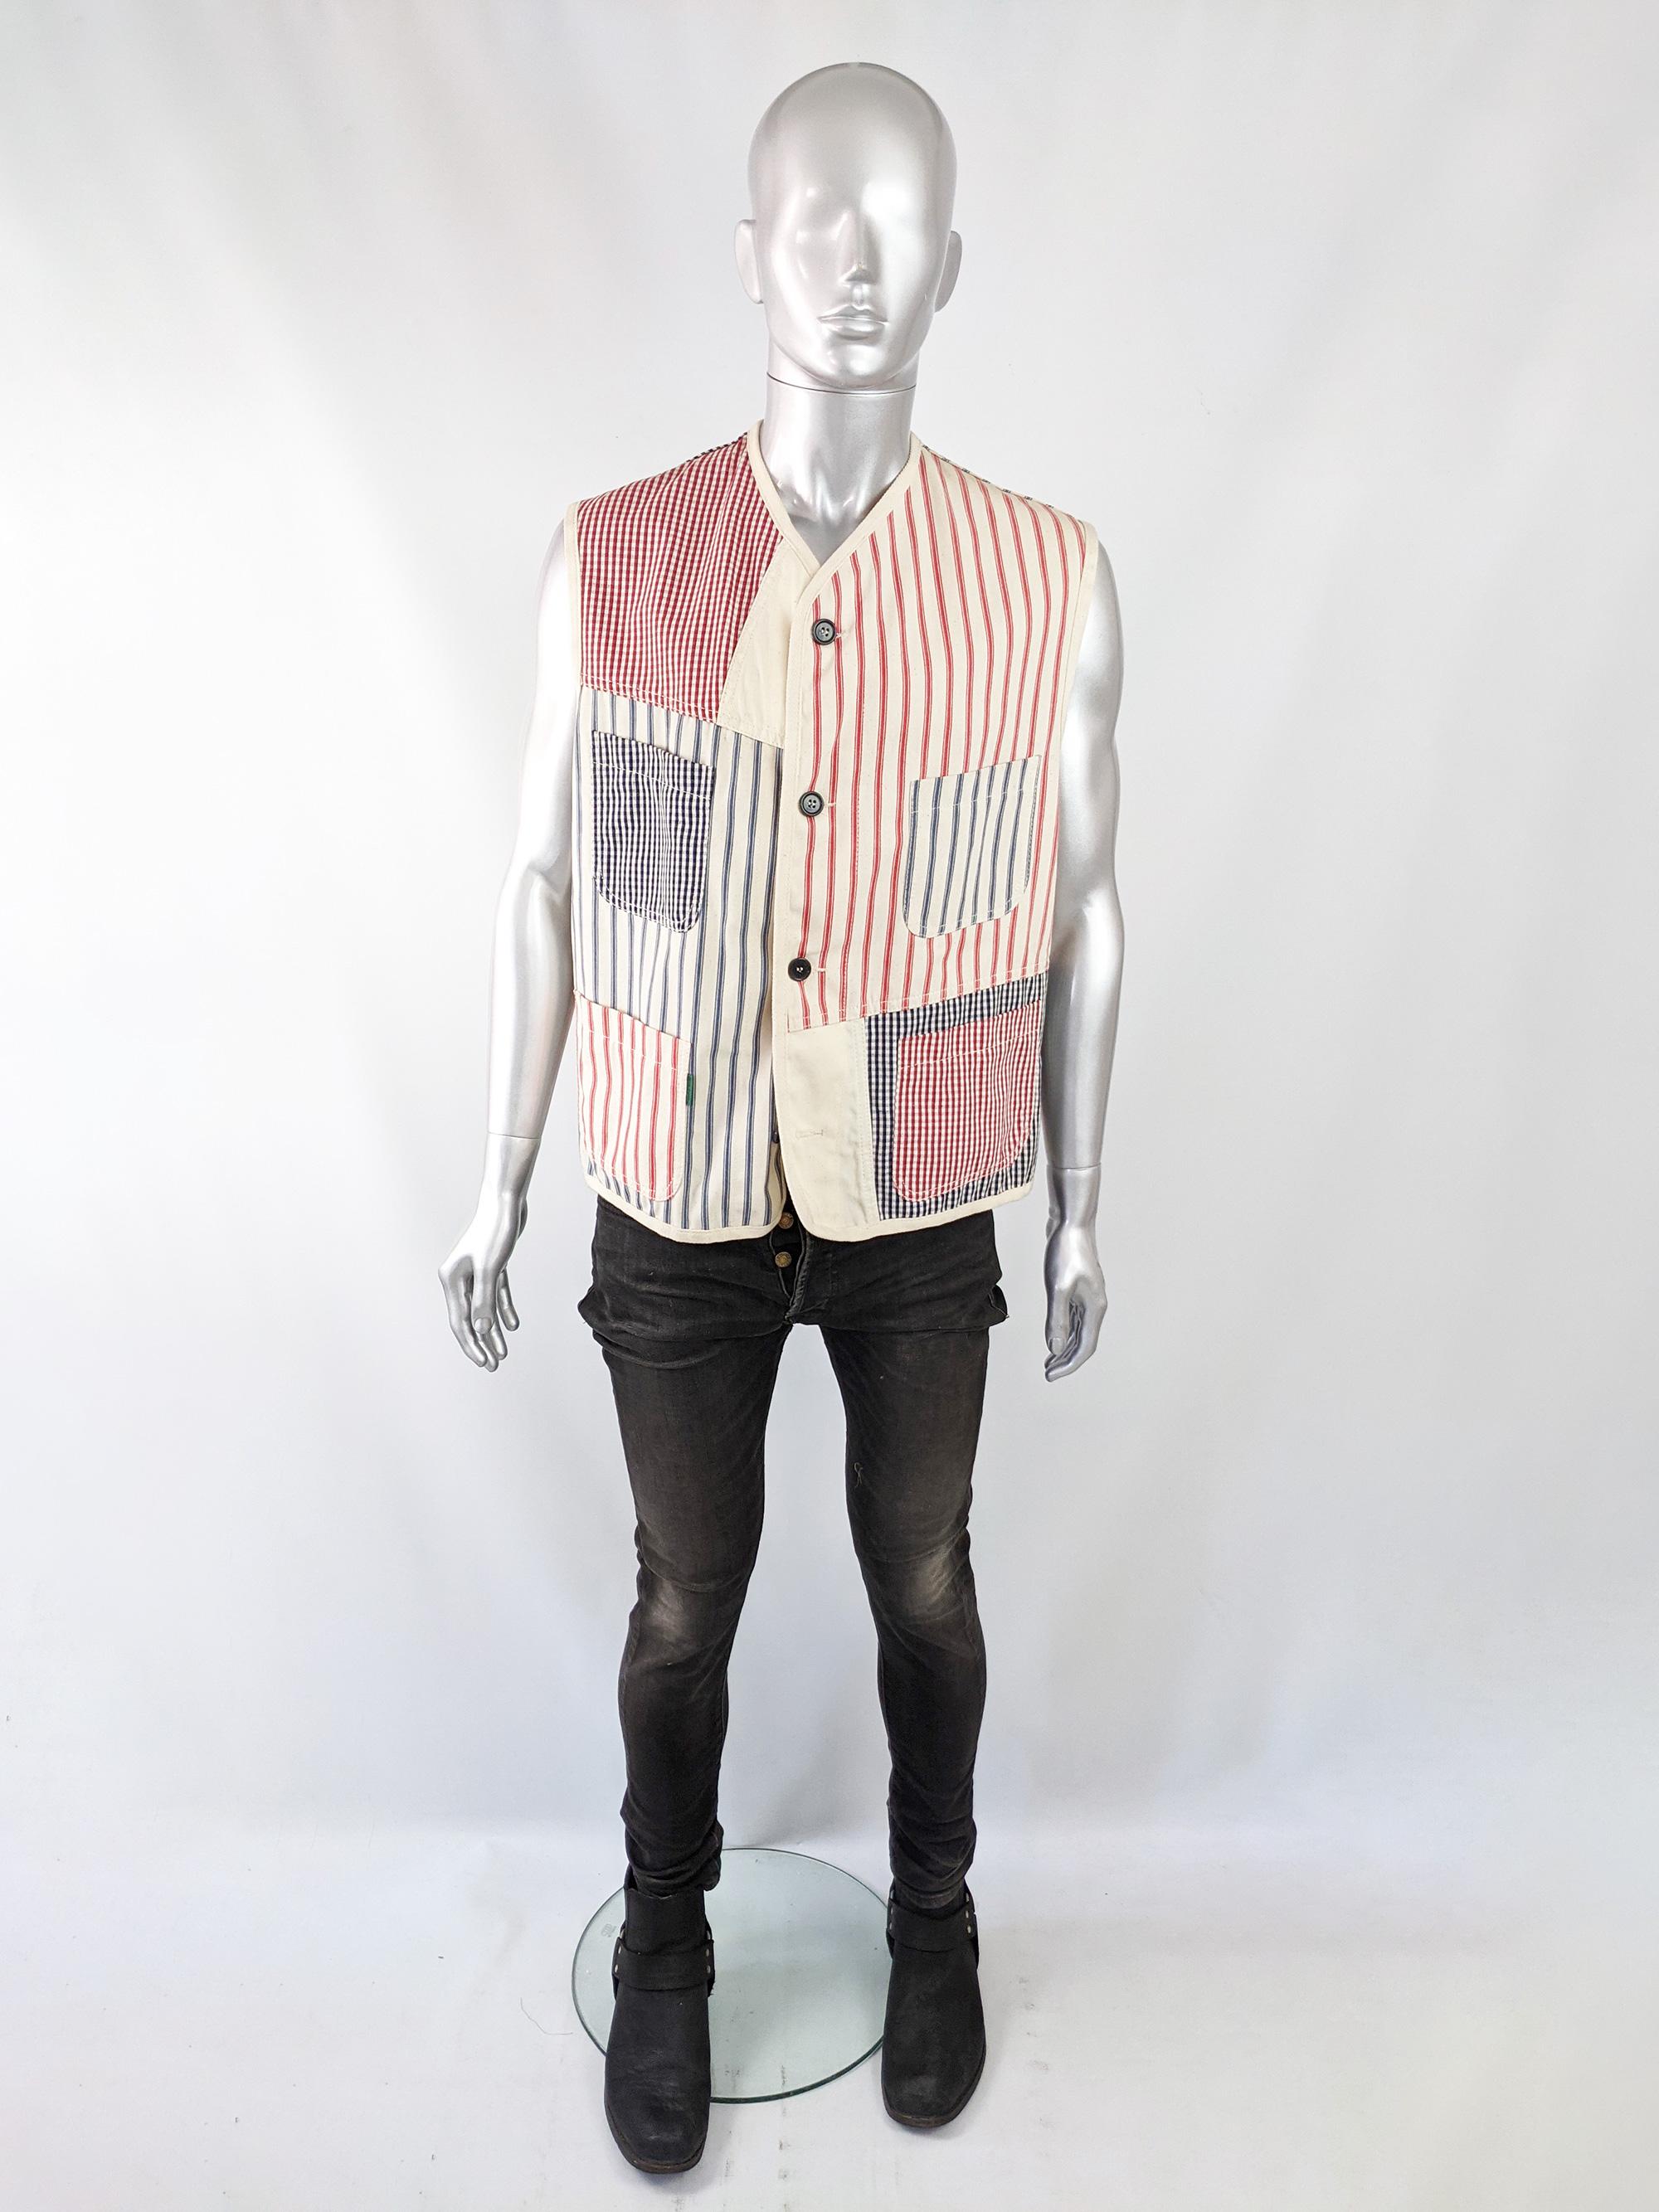 An amazing vintage mens Paul Smith sleeveless jacket from the 90s. In an off-white cotton canvas with a patchwork of stripes and gingham / picnic check panels throughout. 


Size: Marked Large
Chest - 48” / 122cm
Waist - 46” / 117cm
Length (Shoulder